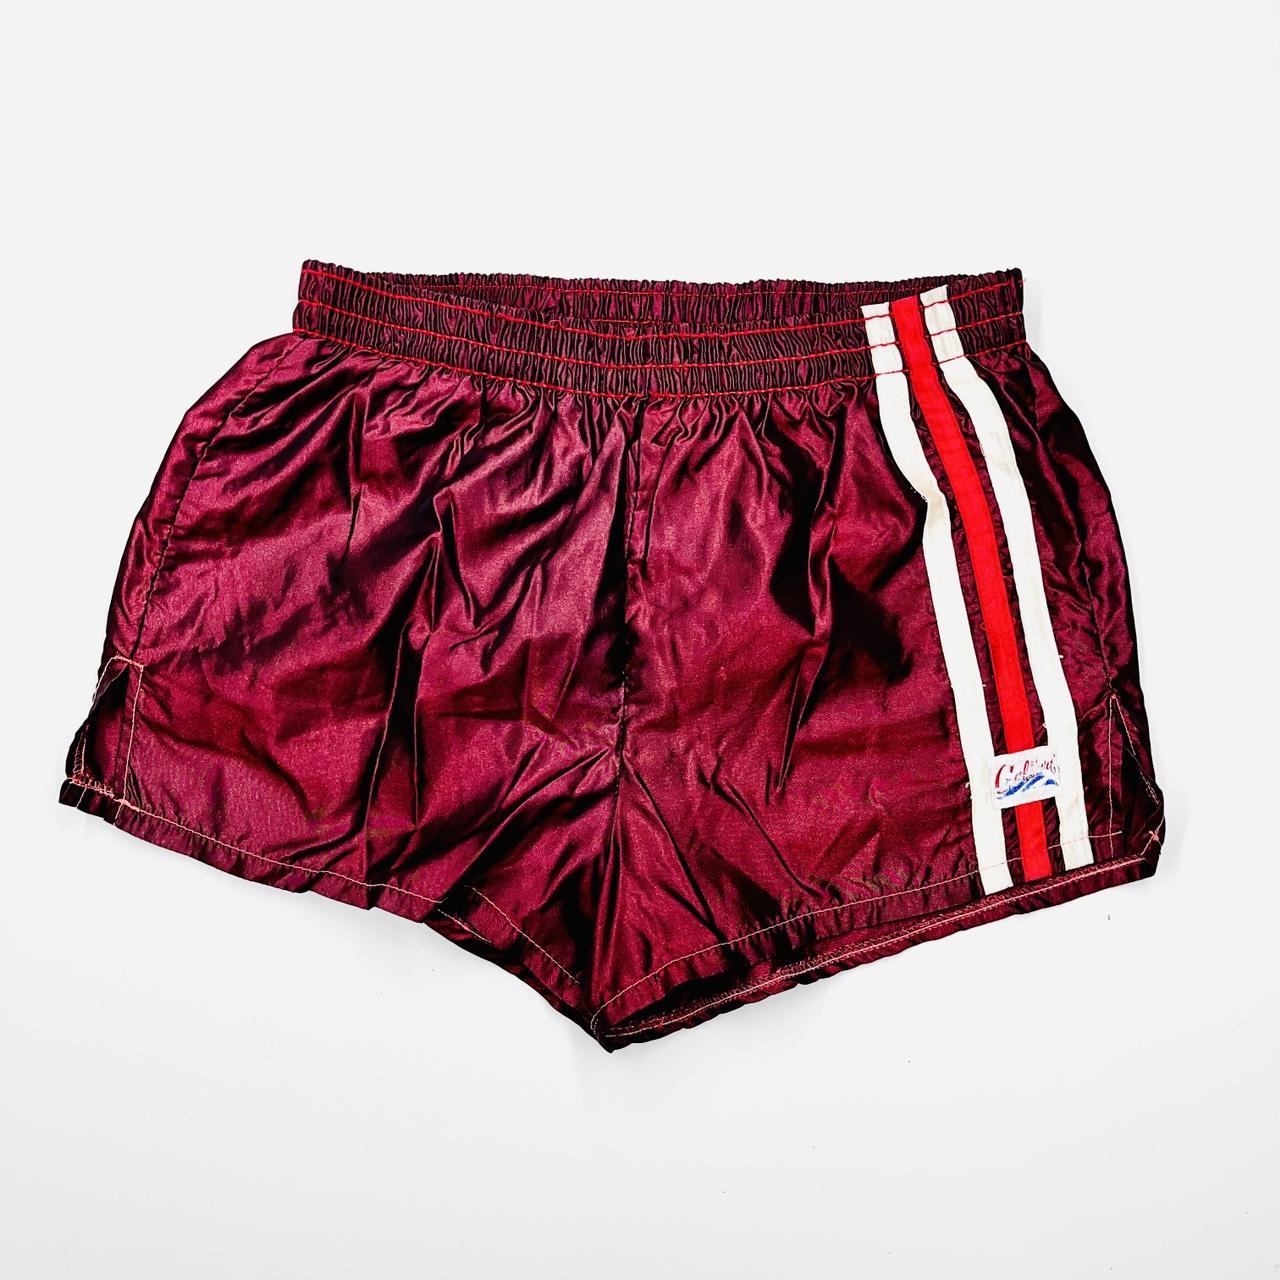 California Waves Women's Burgundy and Red Shorts (3)